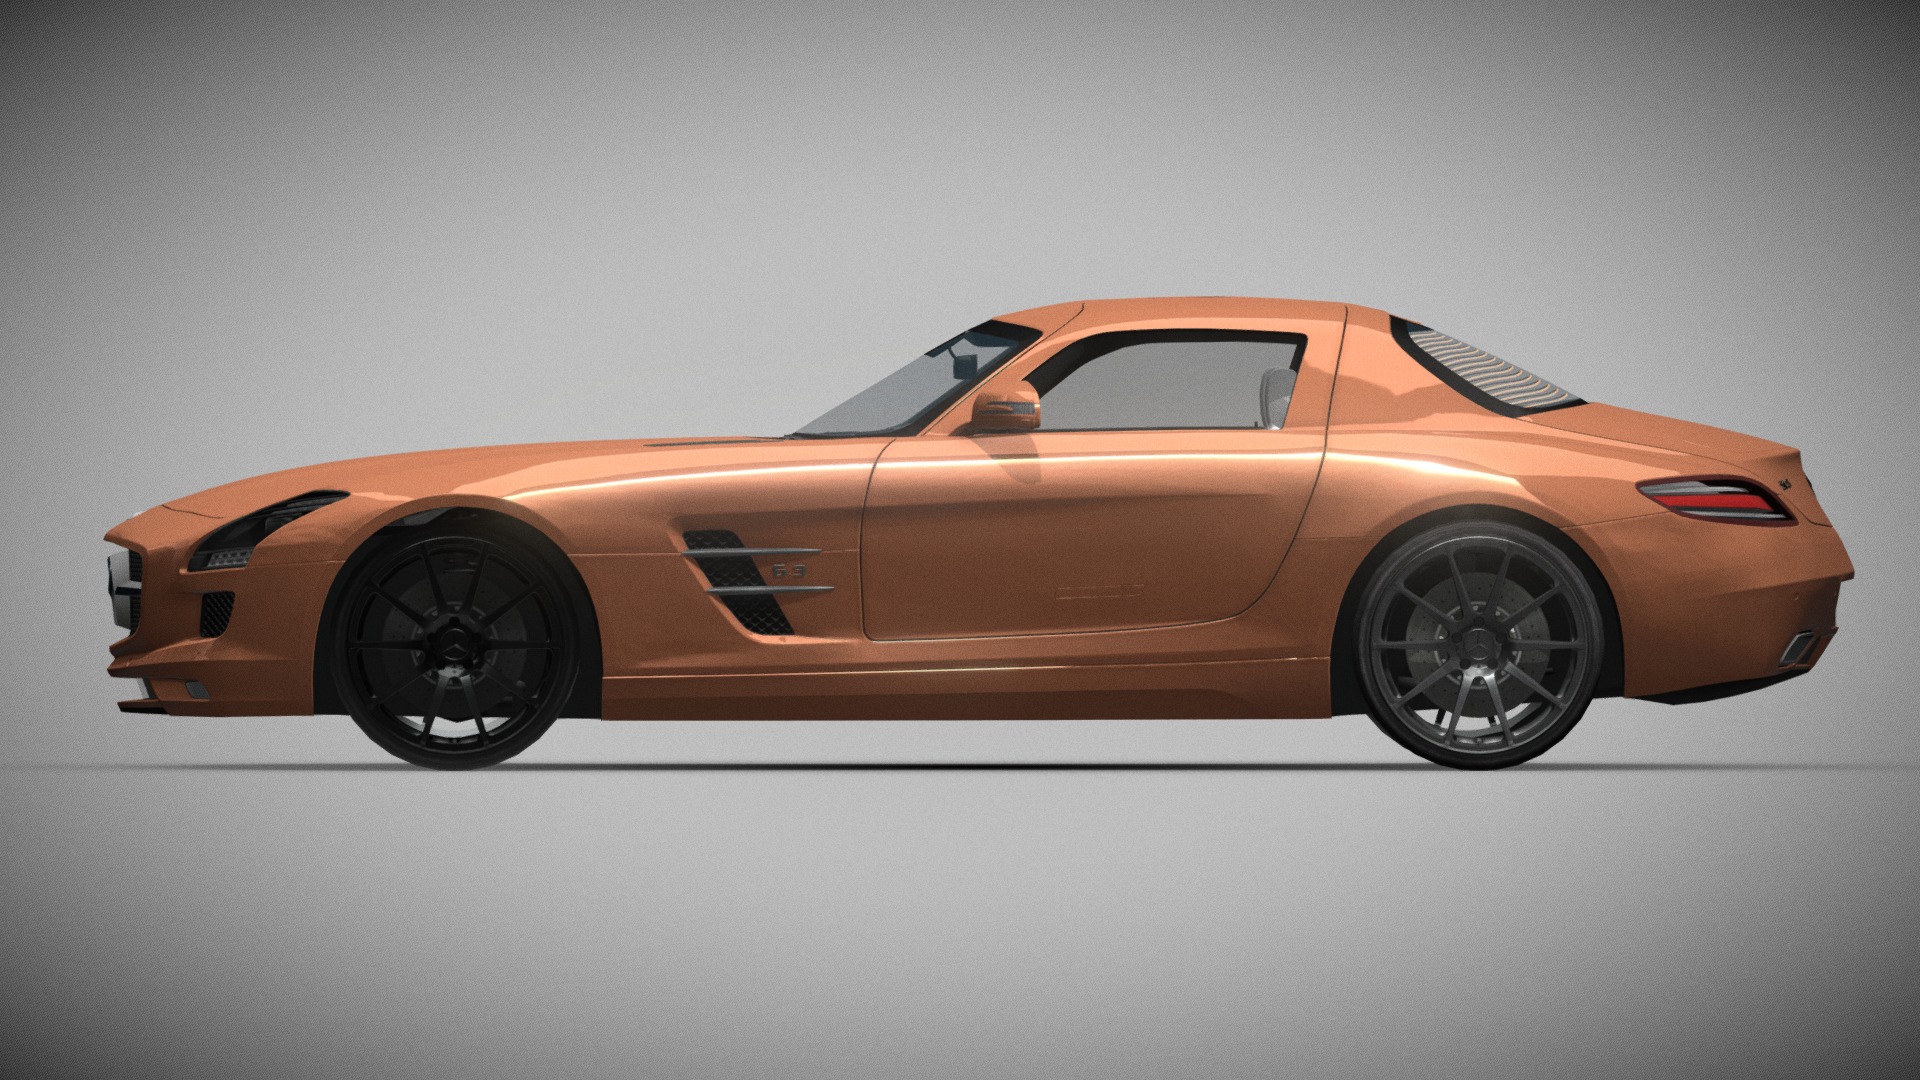 3D model Mercedes Benz Luxurycar Model - This is a 3D model of the Mercedes Benz Luxurycar Model. The 3D model is about a brown sports car.